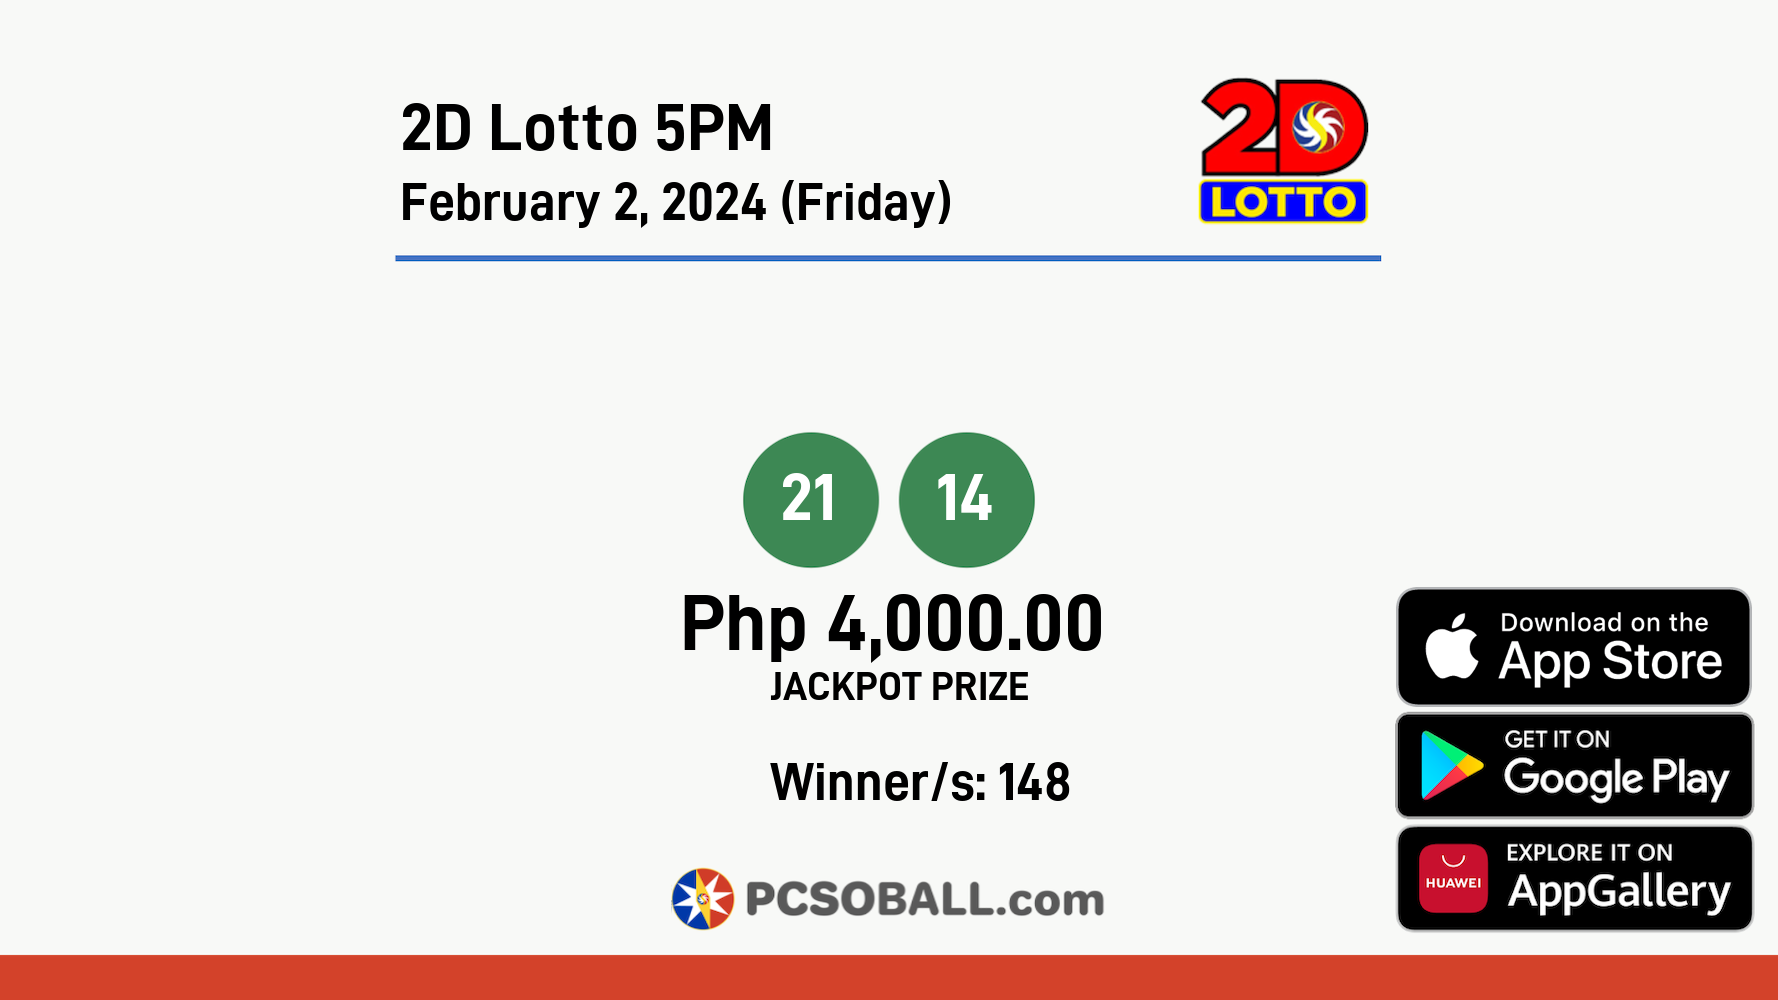 2D Lotto 5PM February 2, 2024 (Friday) Result